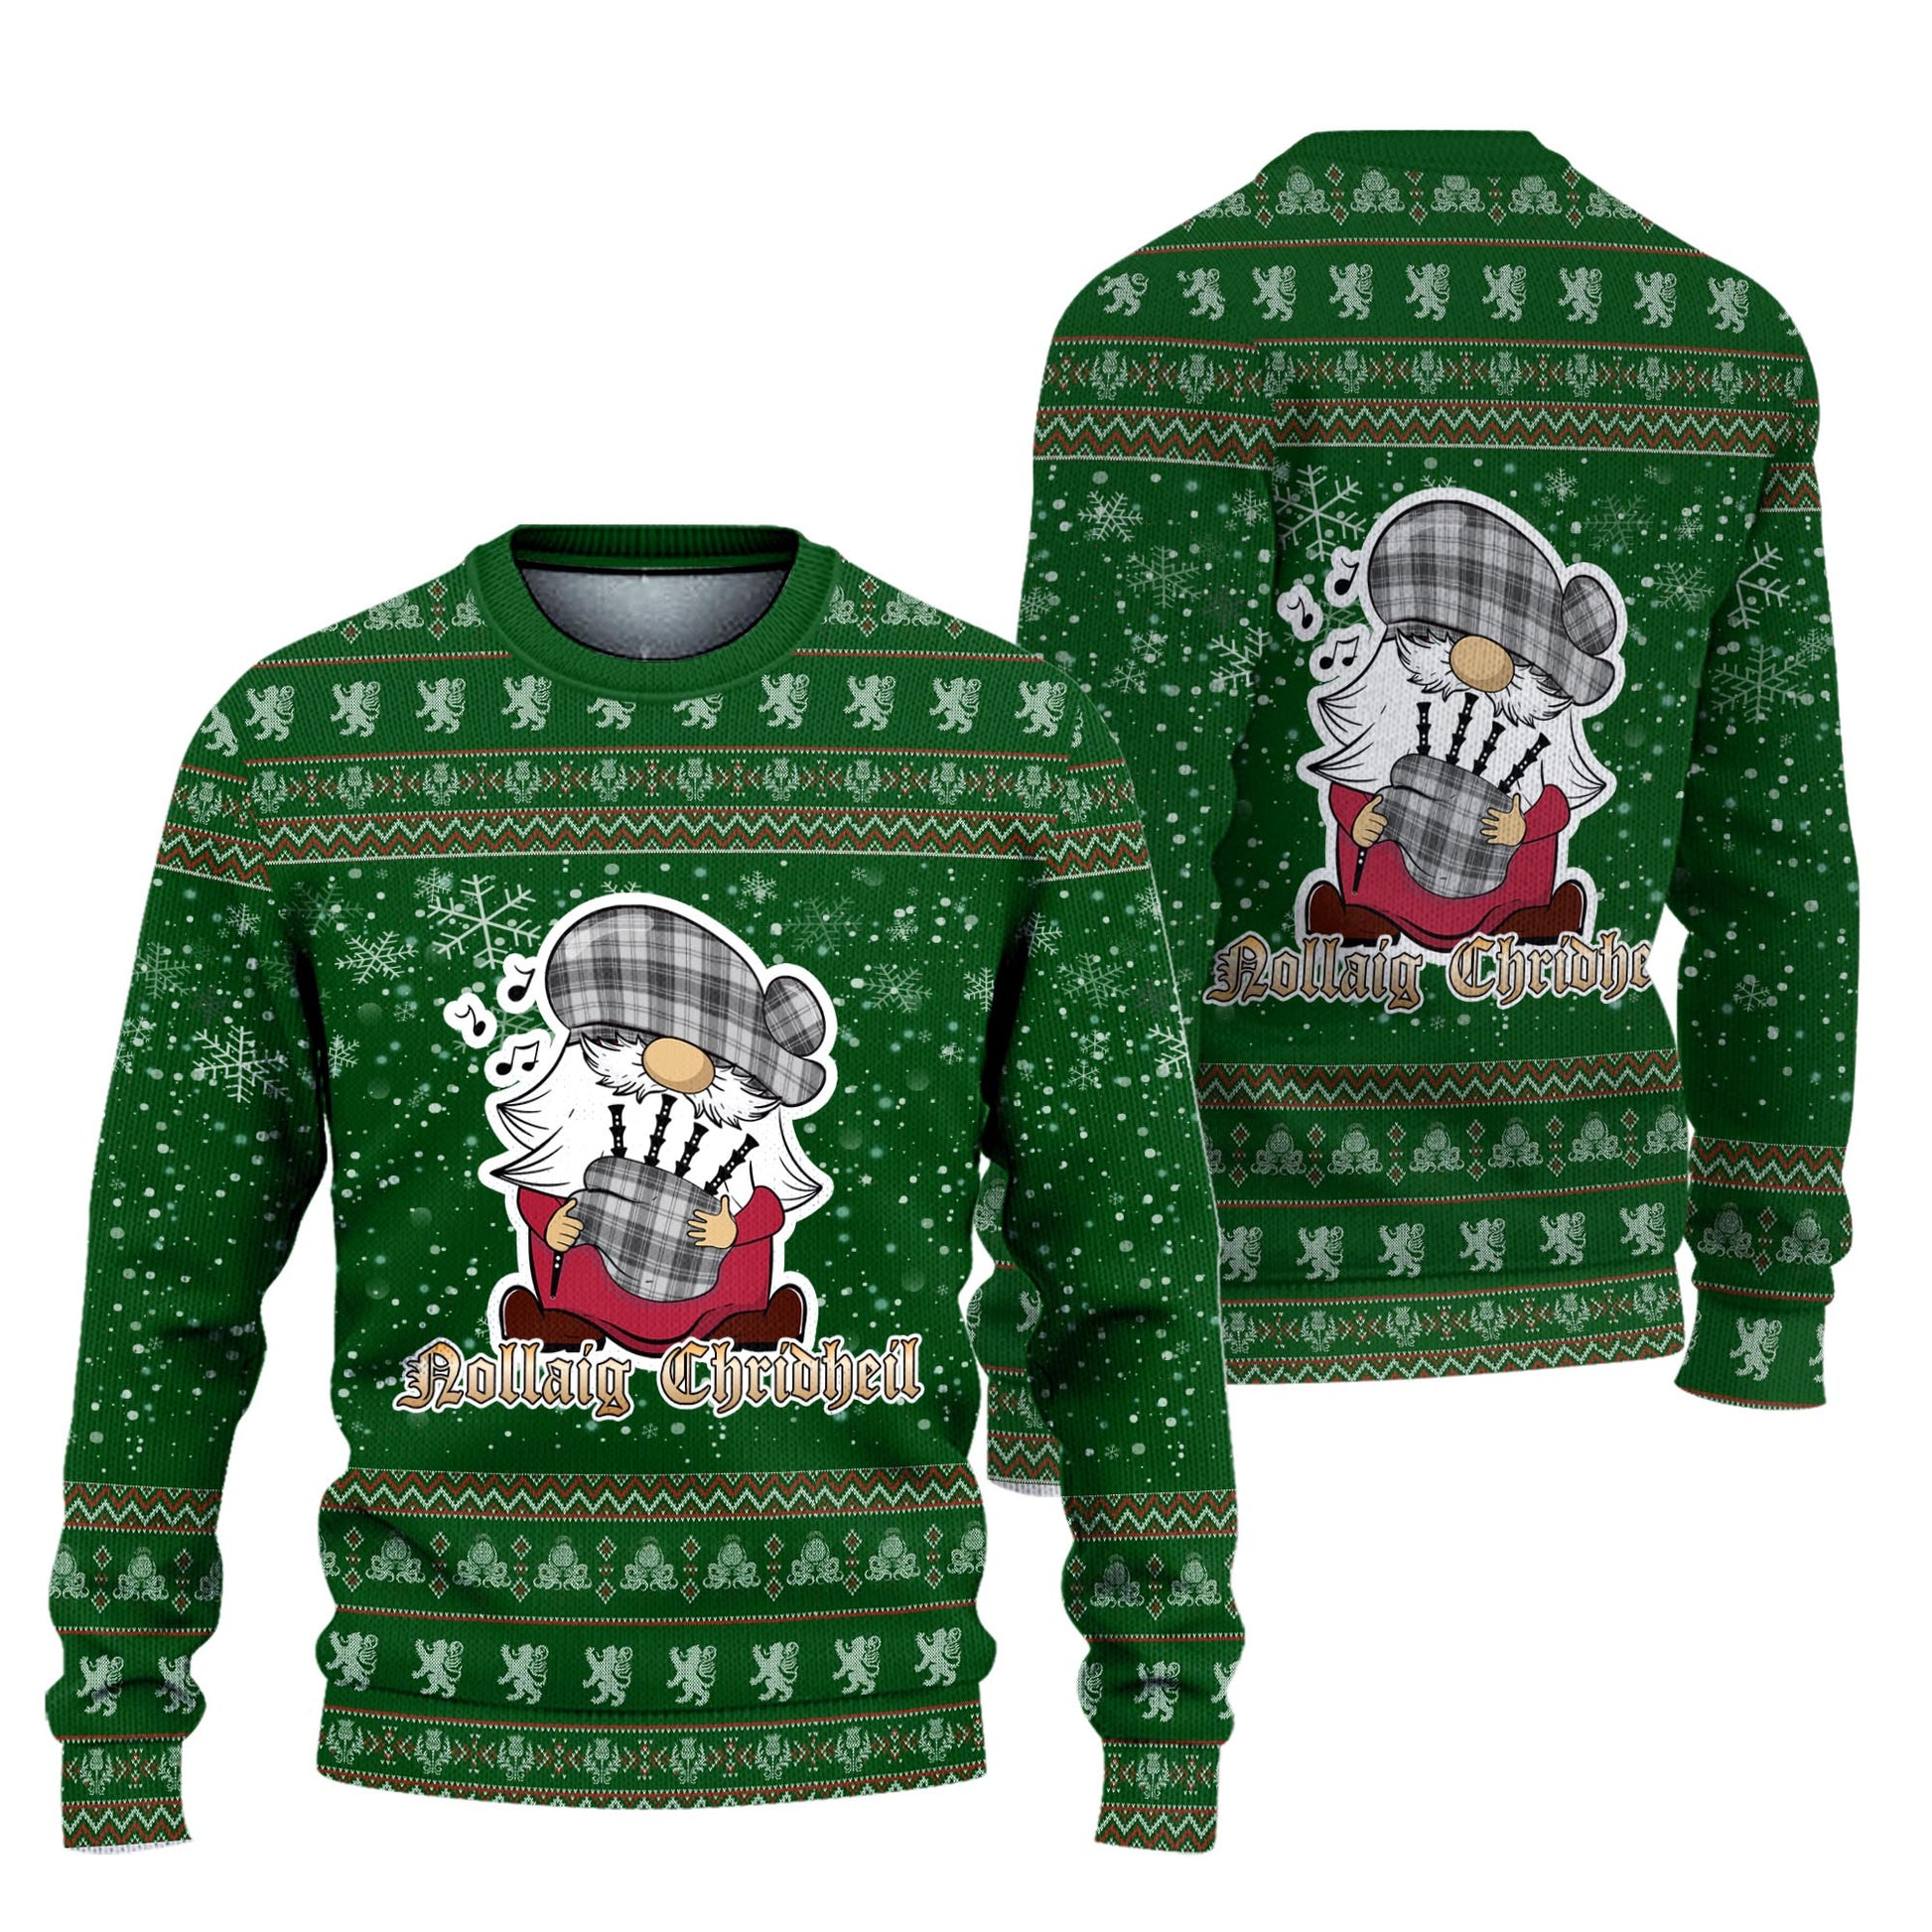 Glendinning Clan Christmas Family Knitted Sweater with Funny Gnome Playing Bagpipes Unisex Green - Tartanvibesclothing